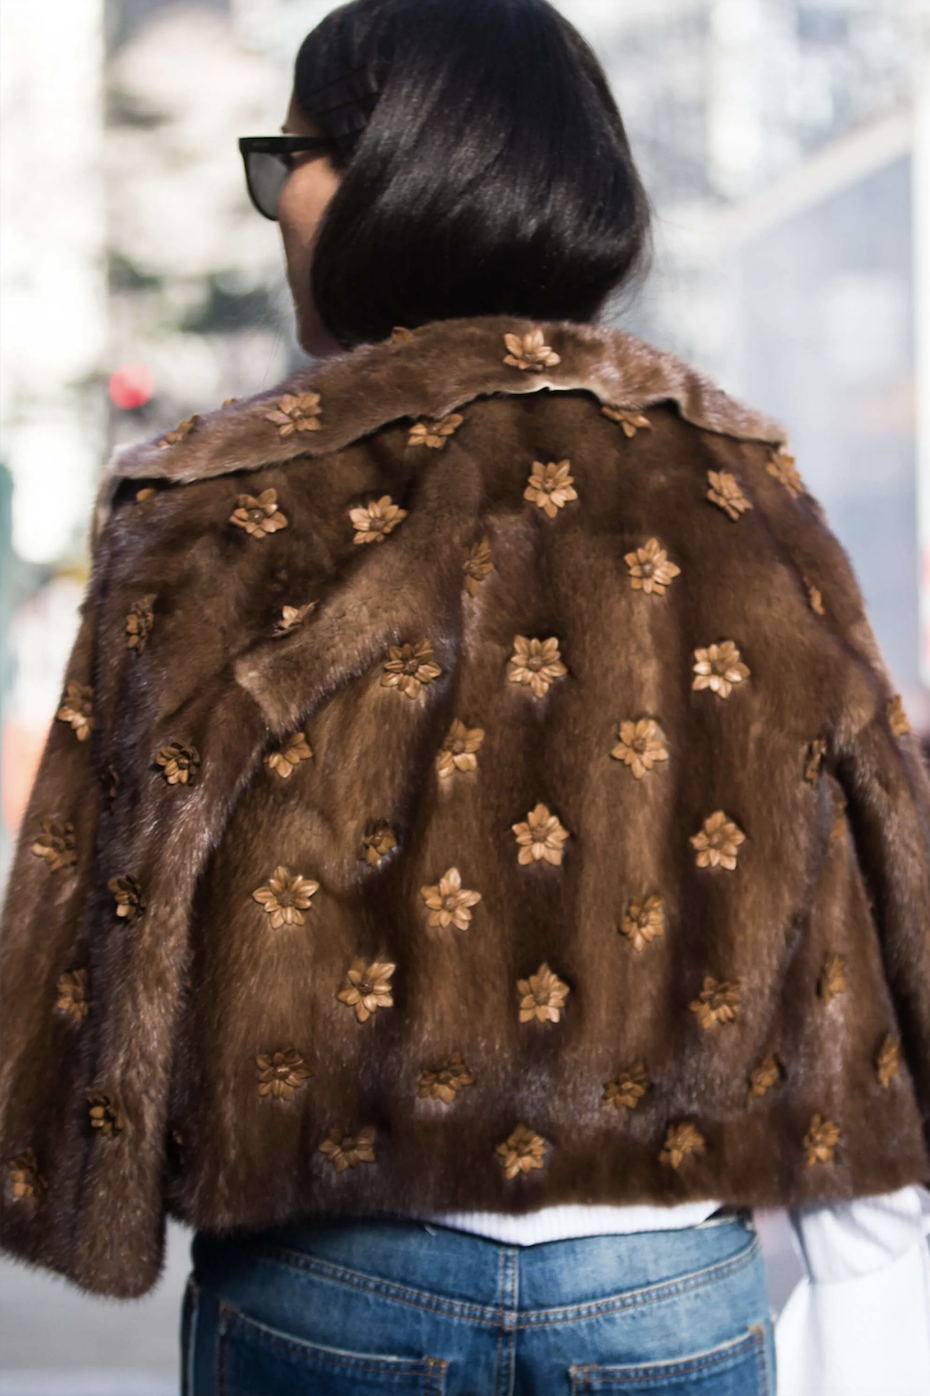 Vogue Business: Neiman Marcus is swapping fur for apple leather